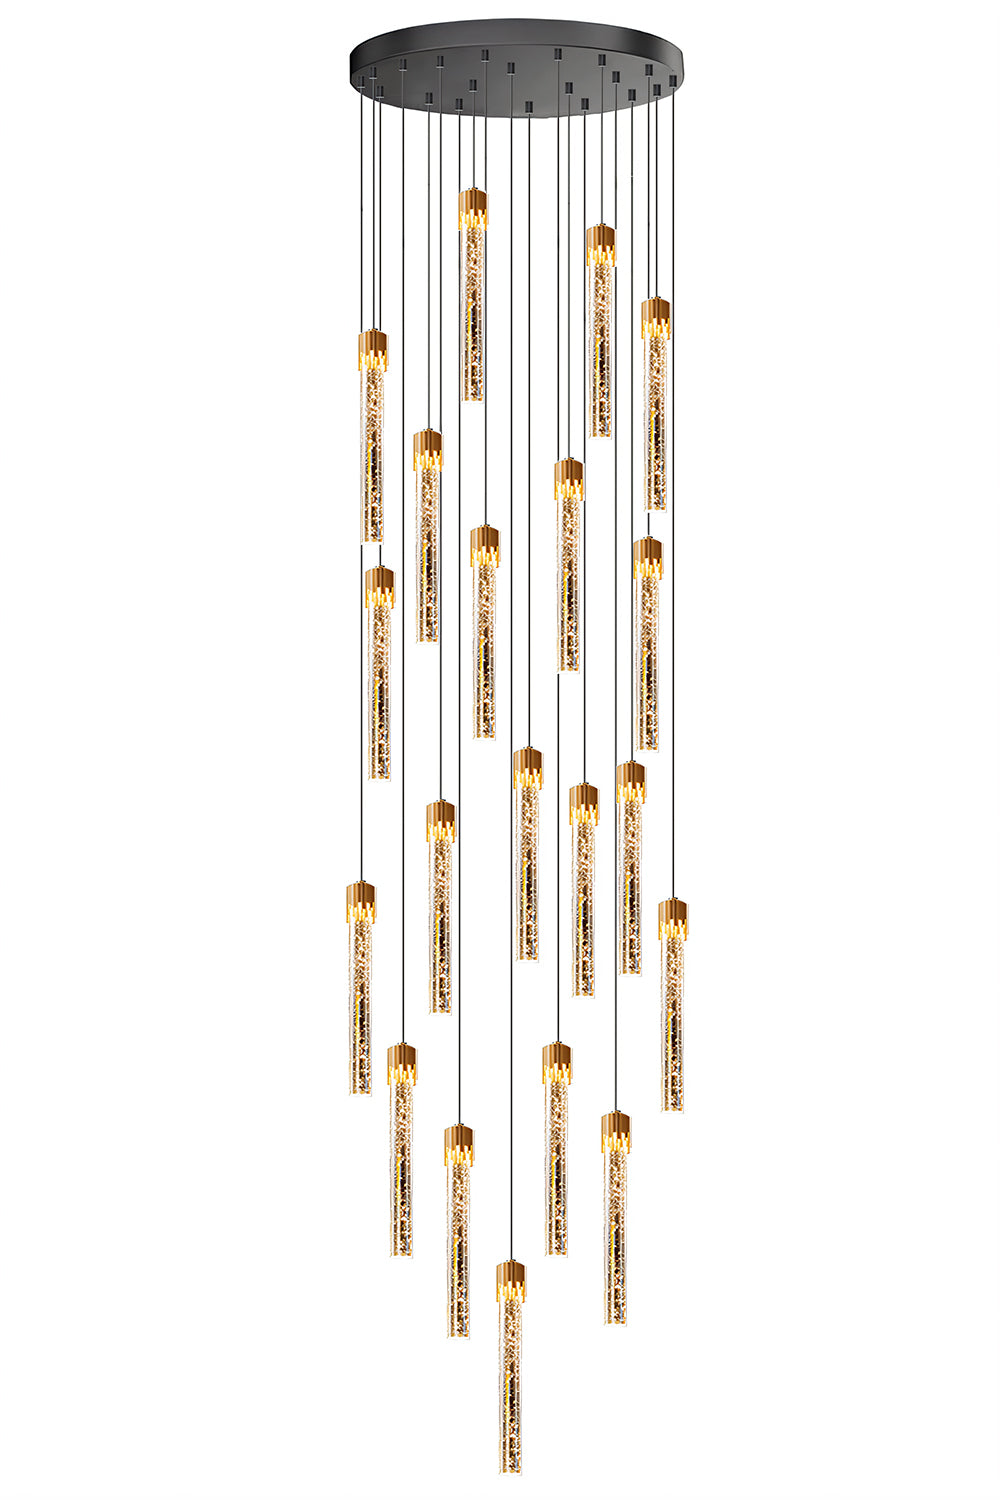 Elegant gold bubble crystal pendant light with 20 lights, ideal for adding sophistication.